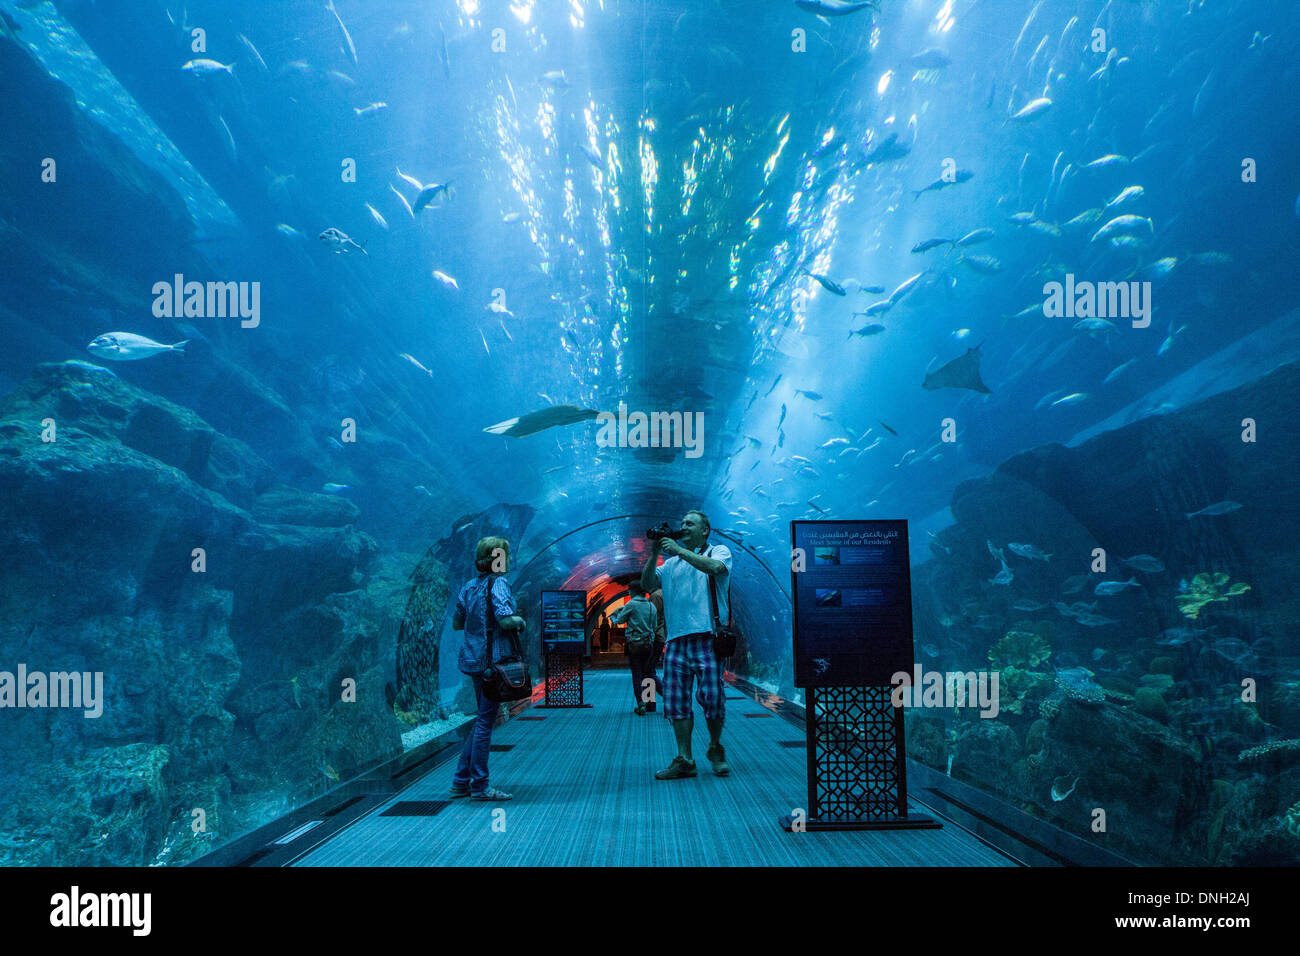 TOURISTS TAKING PICTURES OF THEMSELVES IN THE TUNNEL BELOW THE GIANT AQUARIUM IN THE SHOPPING CENTER DUBAI MALL, DOWNTOWN DUBAI, DUBAI, UNITED ARAB EMIRATES, MIDDLE EAST Stock Photo